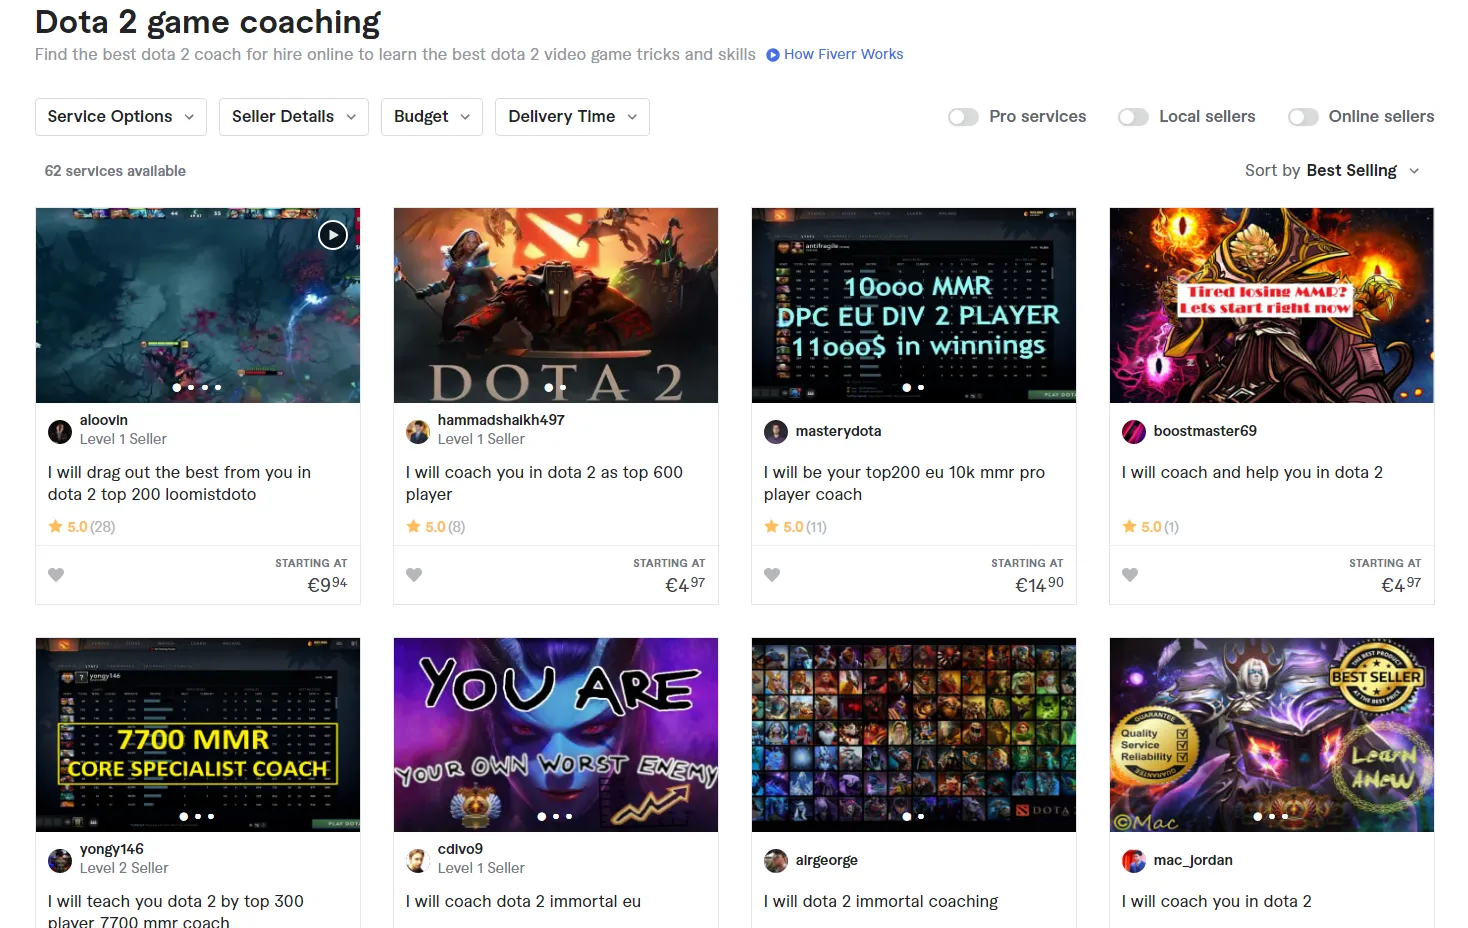 Dota 2 coaching gigs offered on Fiverr.